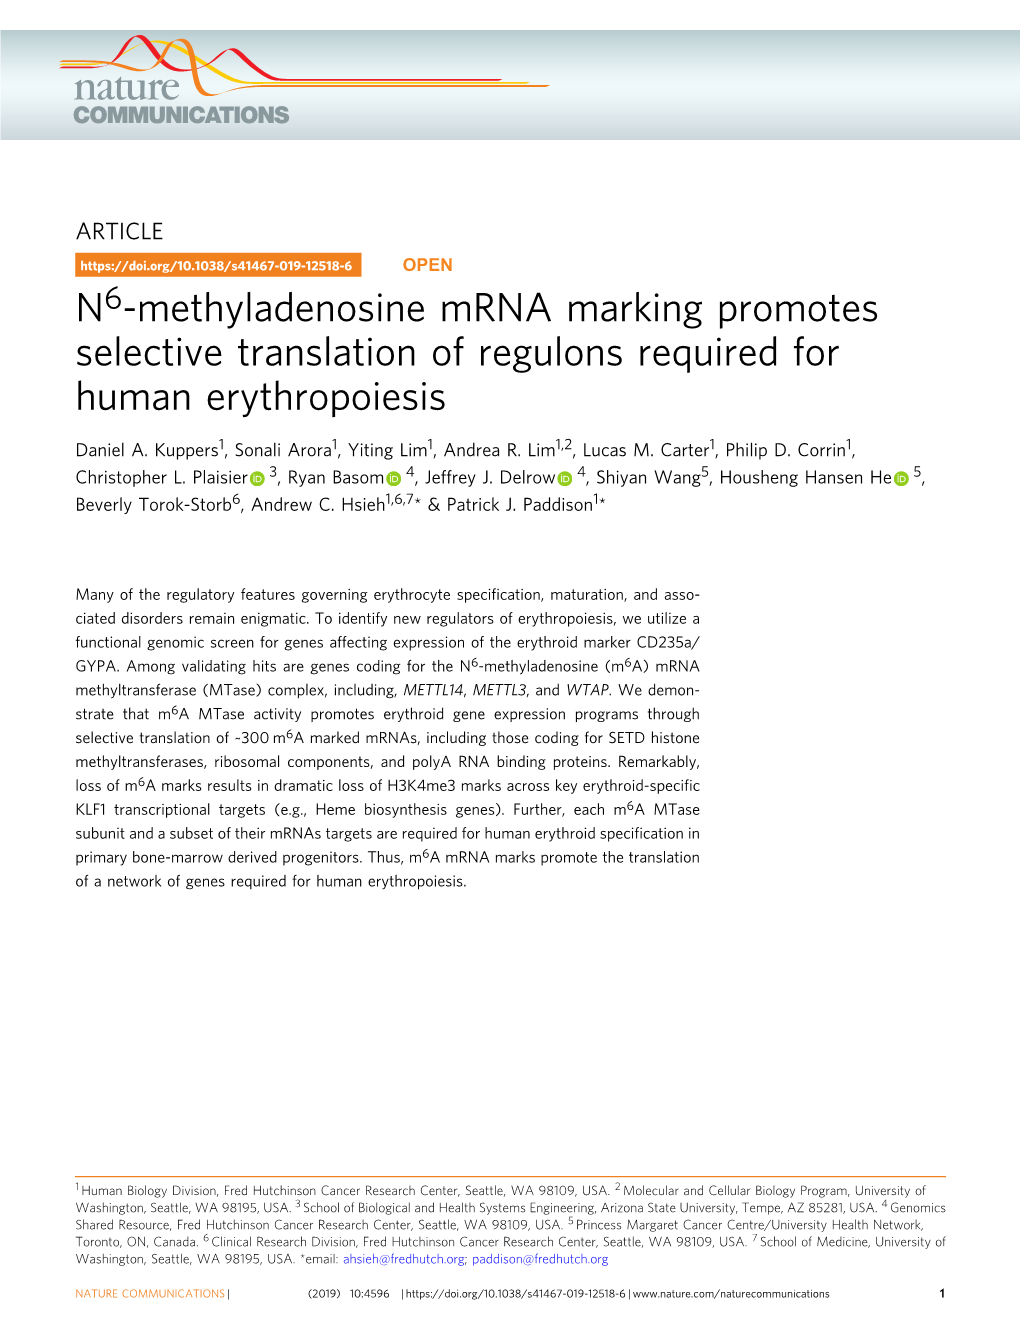 N6-Methyladenosine Mrna Marking Promotes Selective Translation of Regulons Required for Human Erythropoiesis